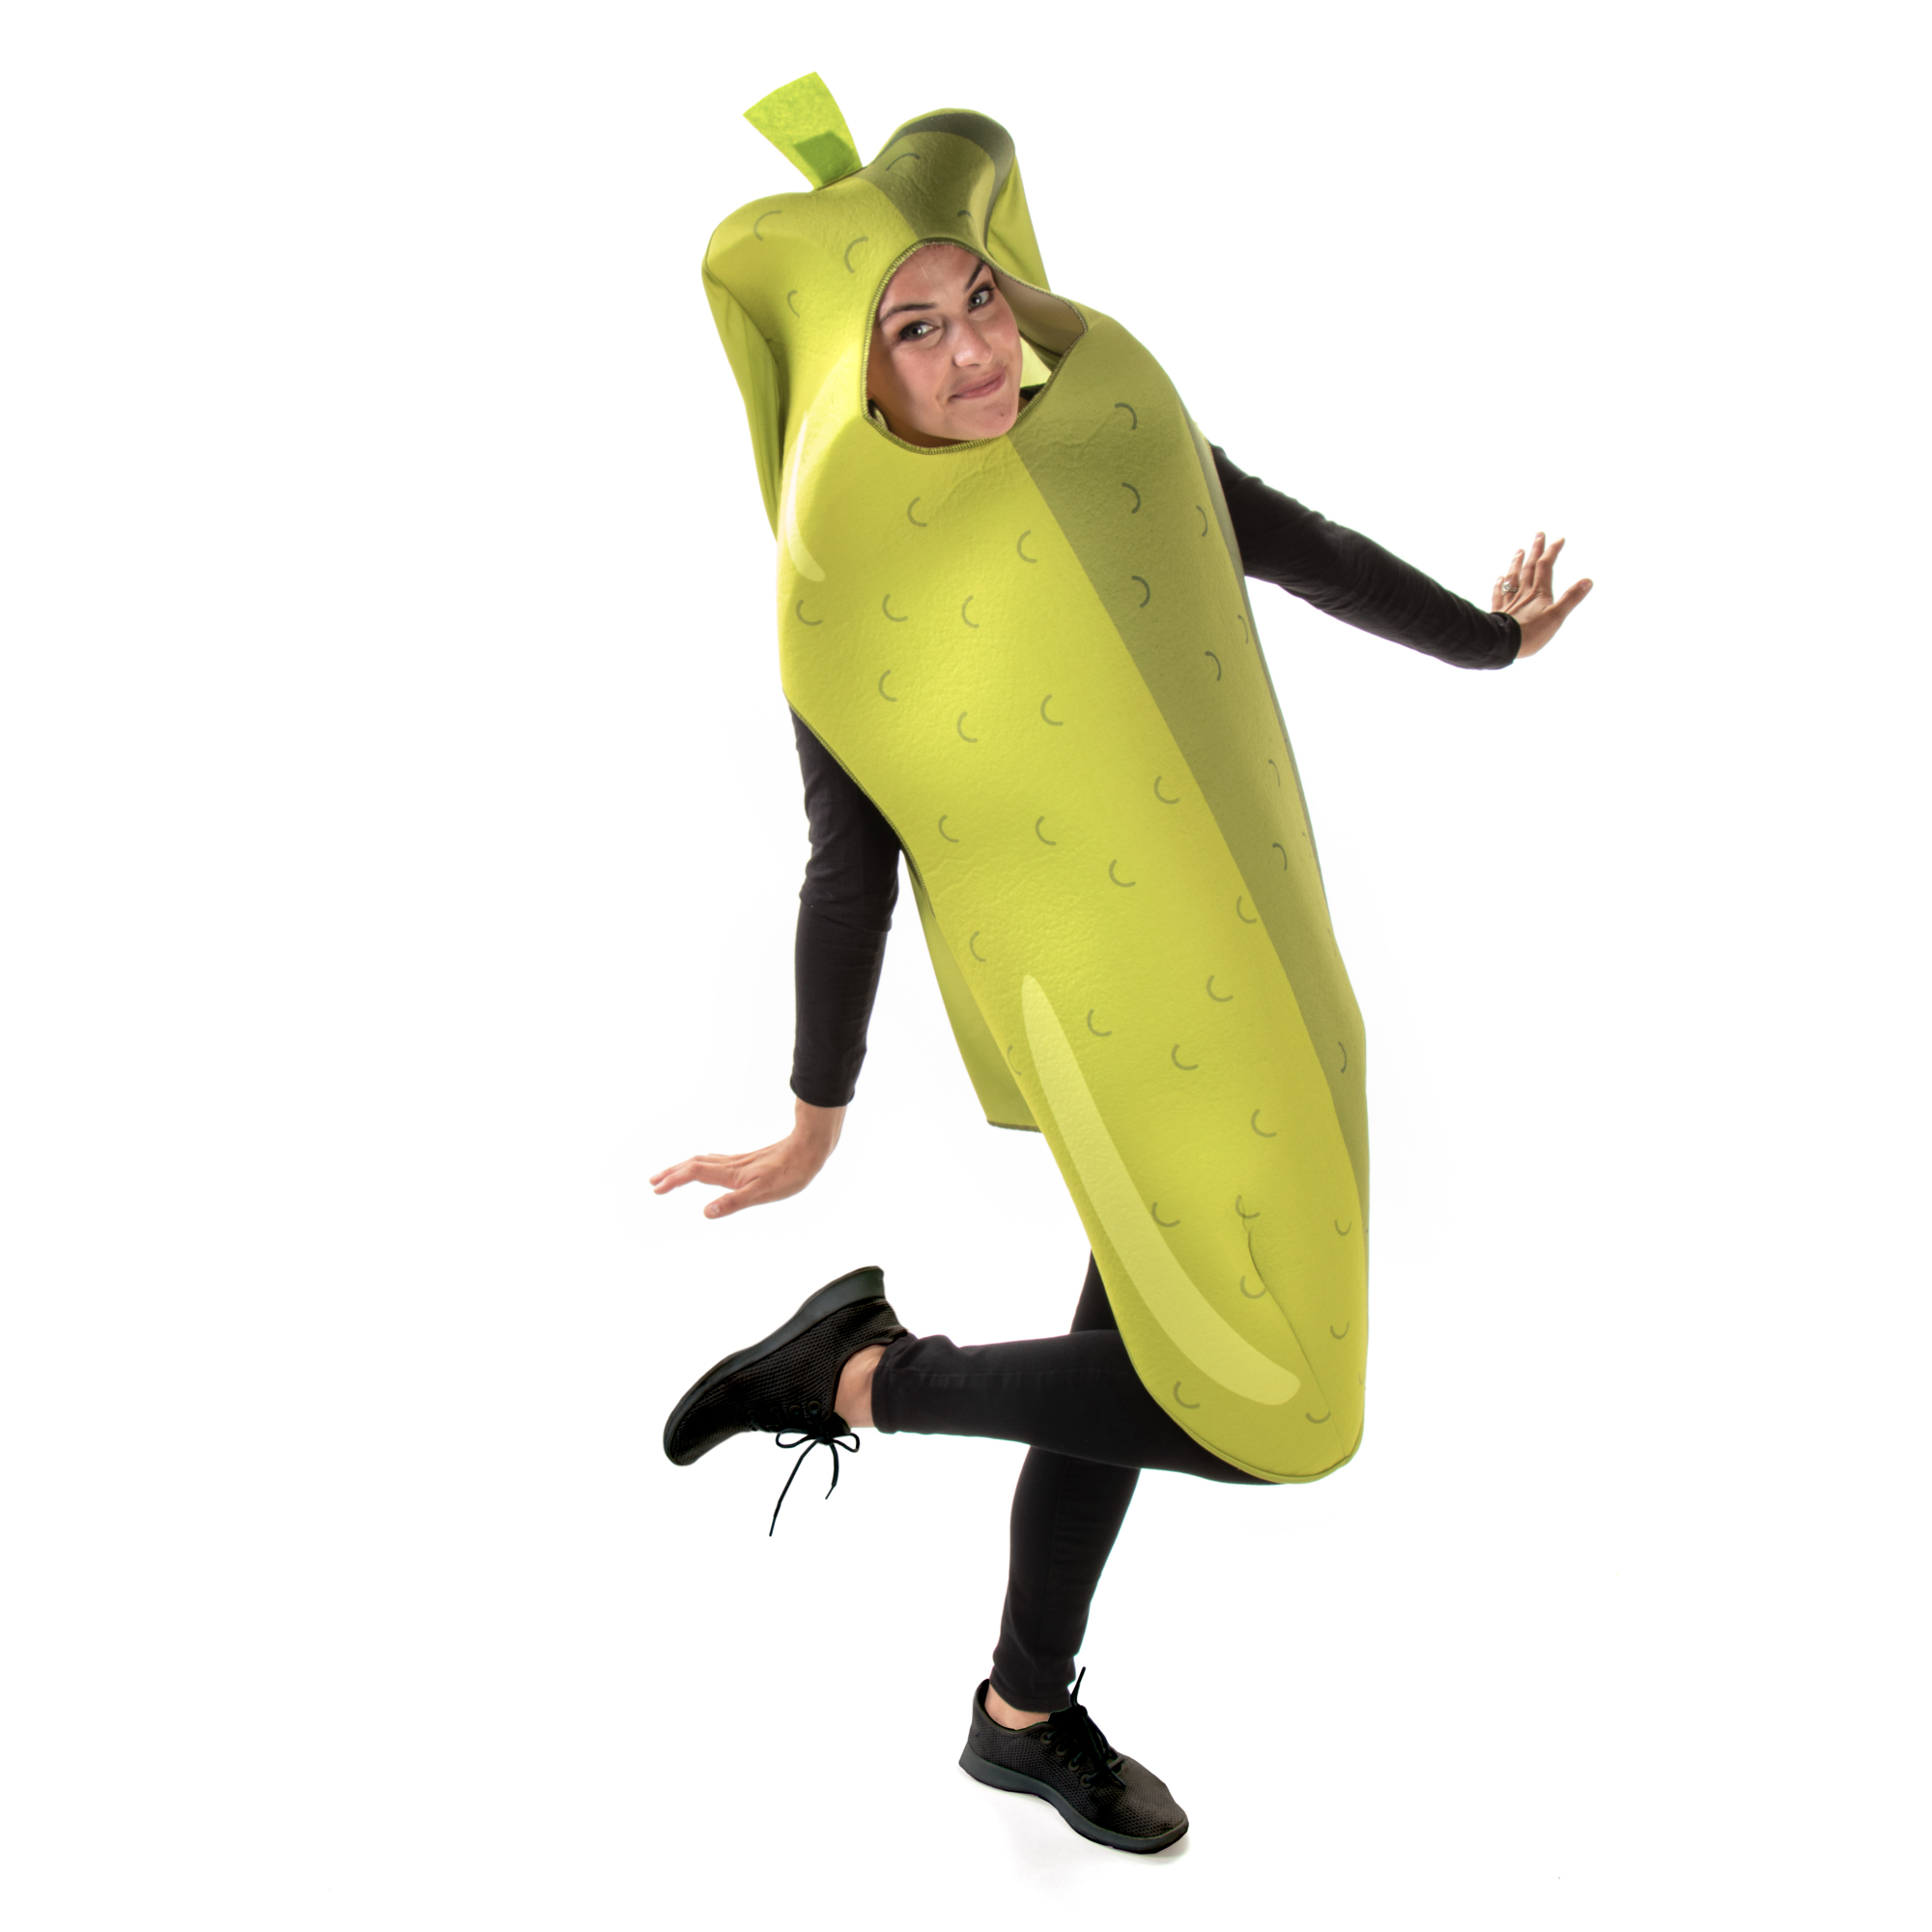 Pregnancy Craving Couples Costume - Funny Ice Cream Pickle Food Halloween Outfit - image 3 of 5